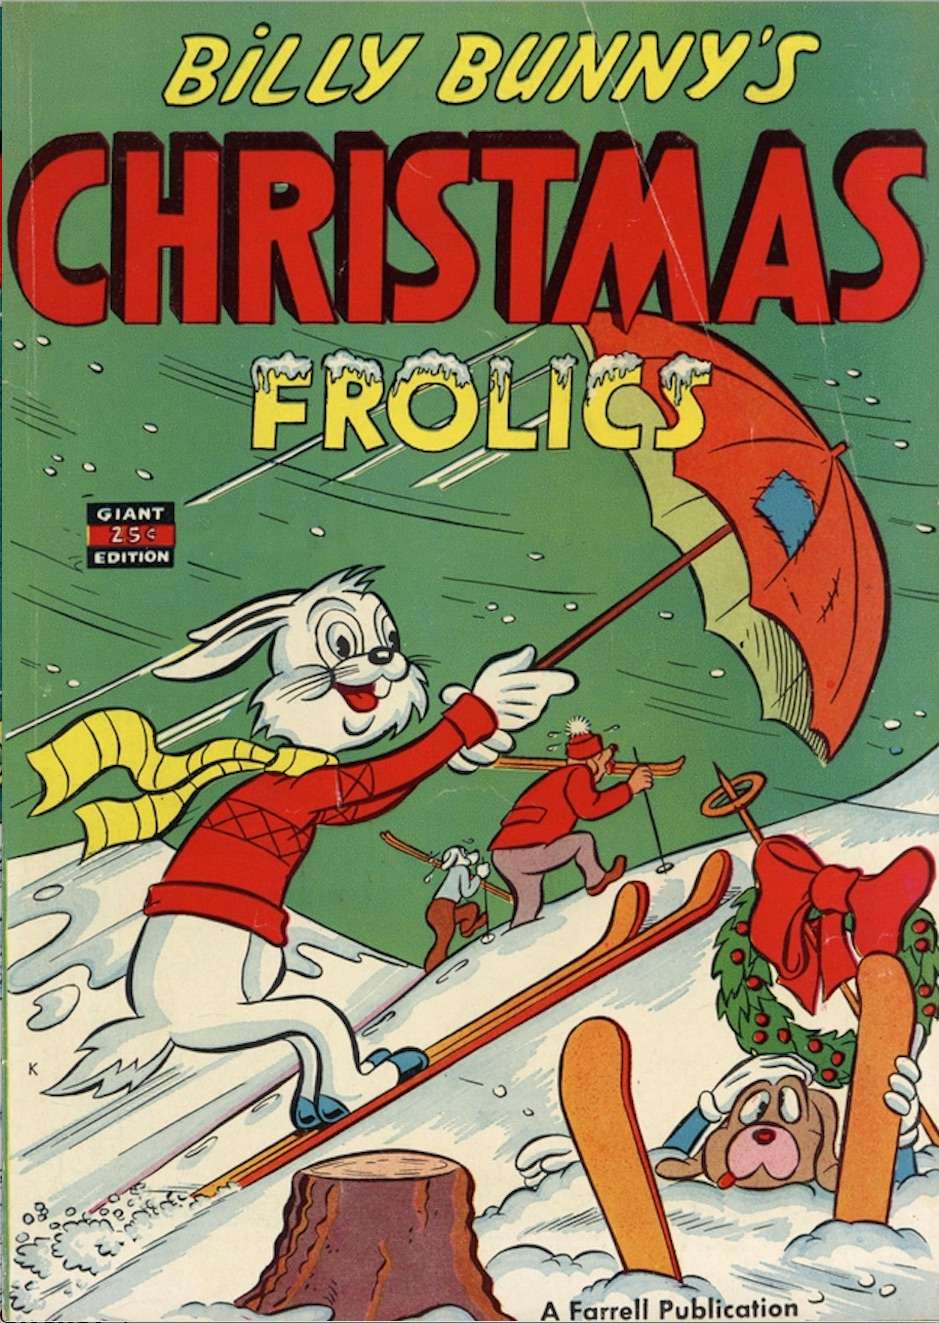 Book Cover For Billy Bunny's Christmas Frolics 1 - Version 1